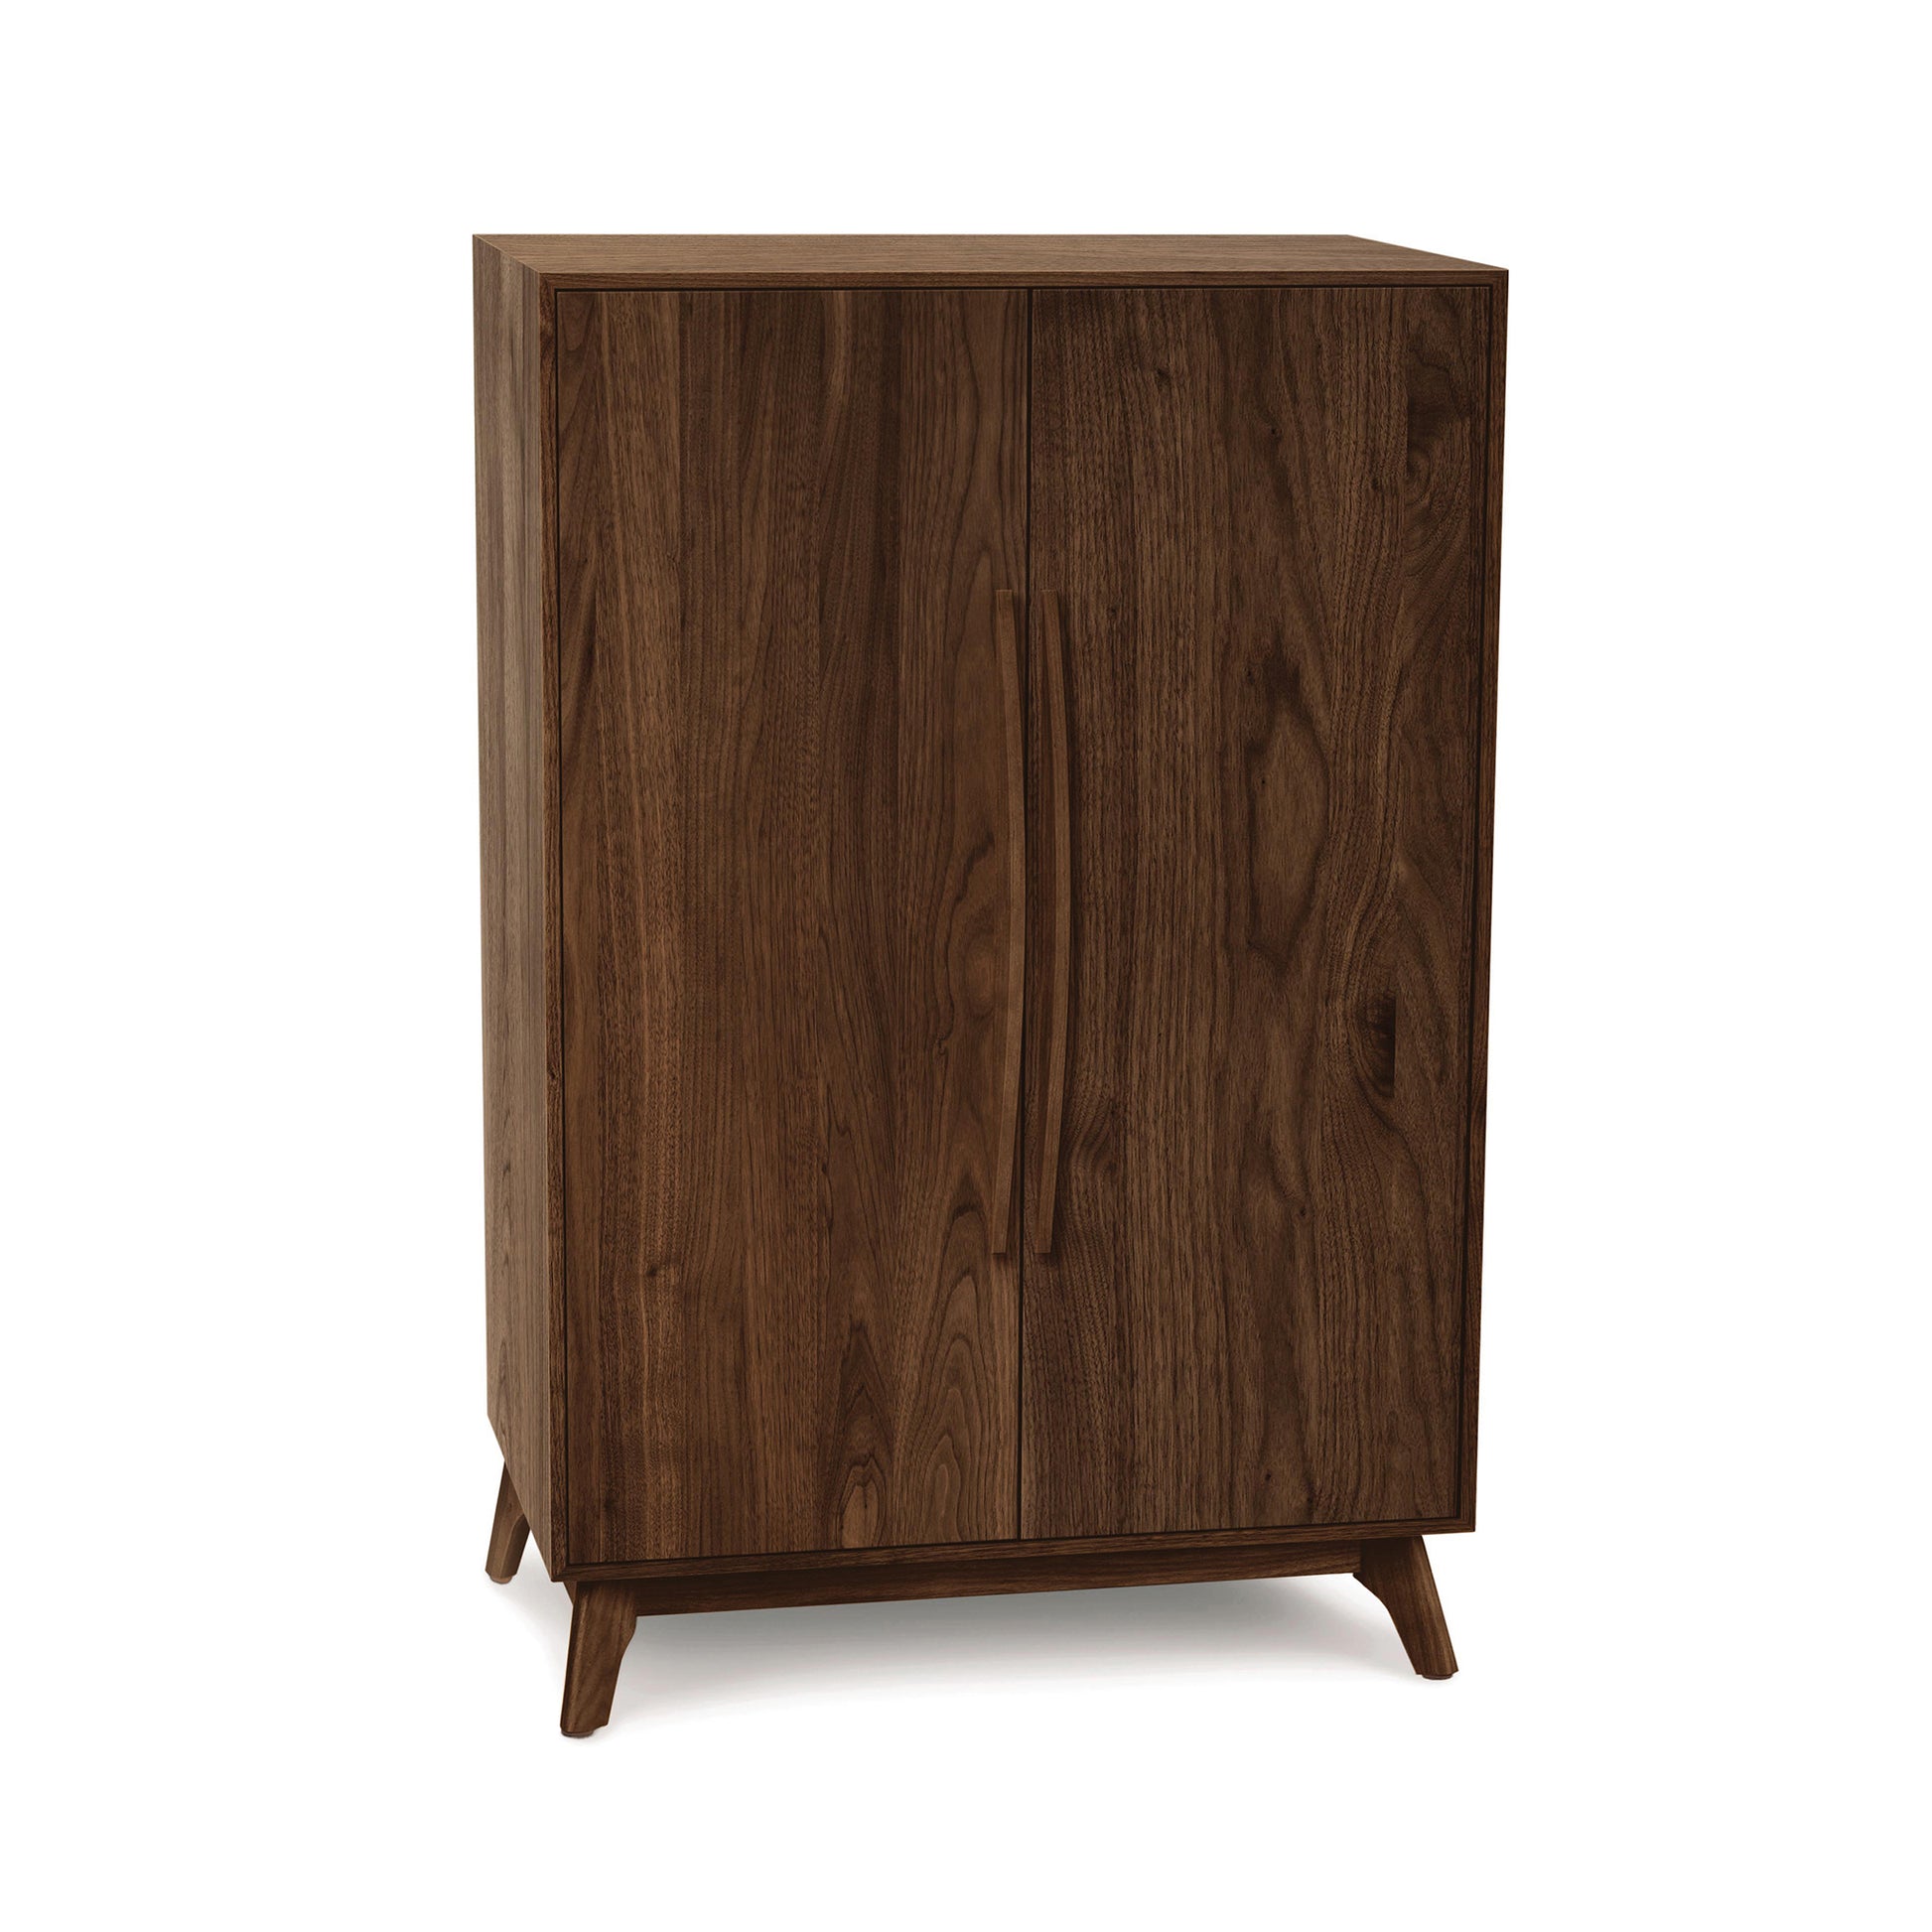 A Copeland Furniture Catalina Bar Cabinet with wine storage, featuring angled legs and closed doors, set against a white background.